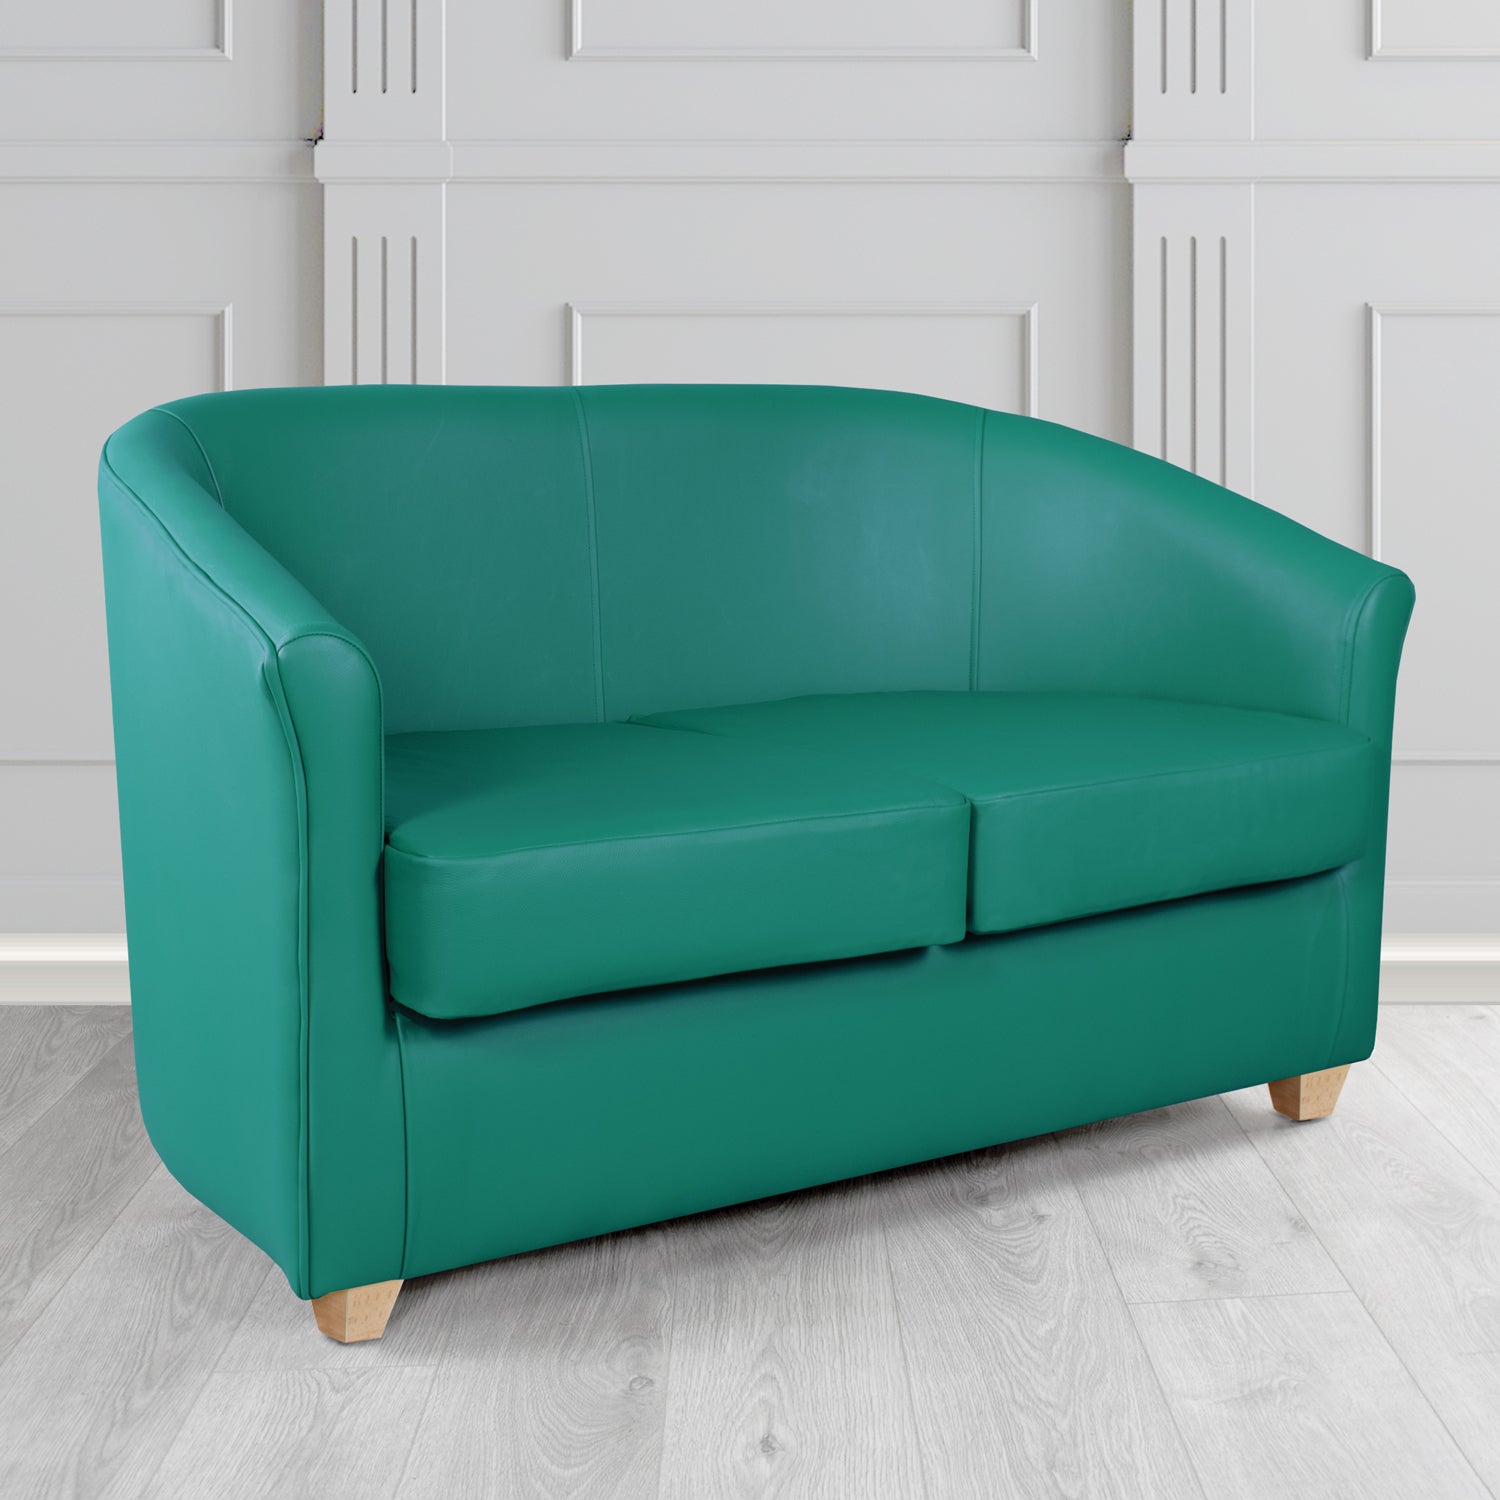 Cannes 2 Seater Tub Sofa in Just Colour Teal Crib 5 Faux Leather - The Tub Chair Shop